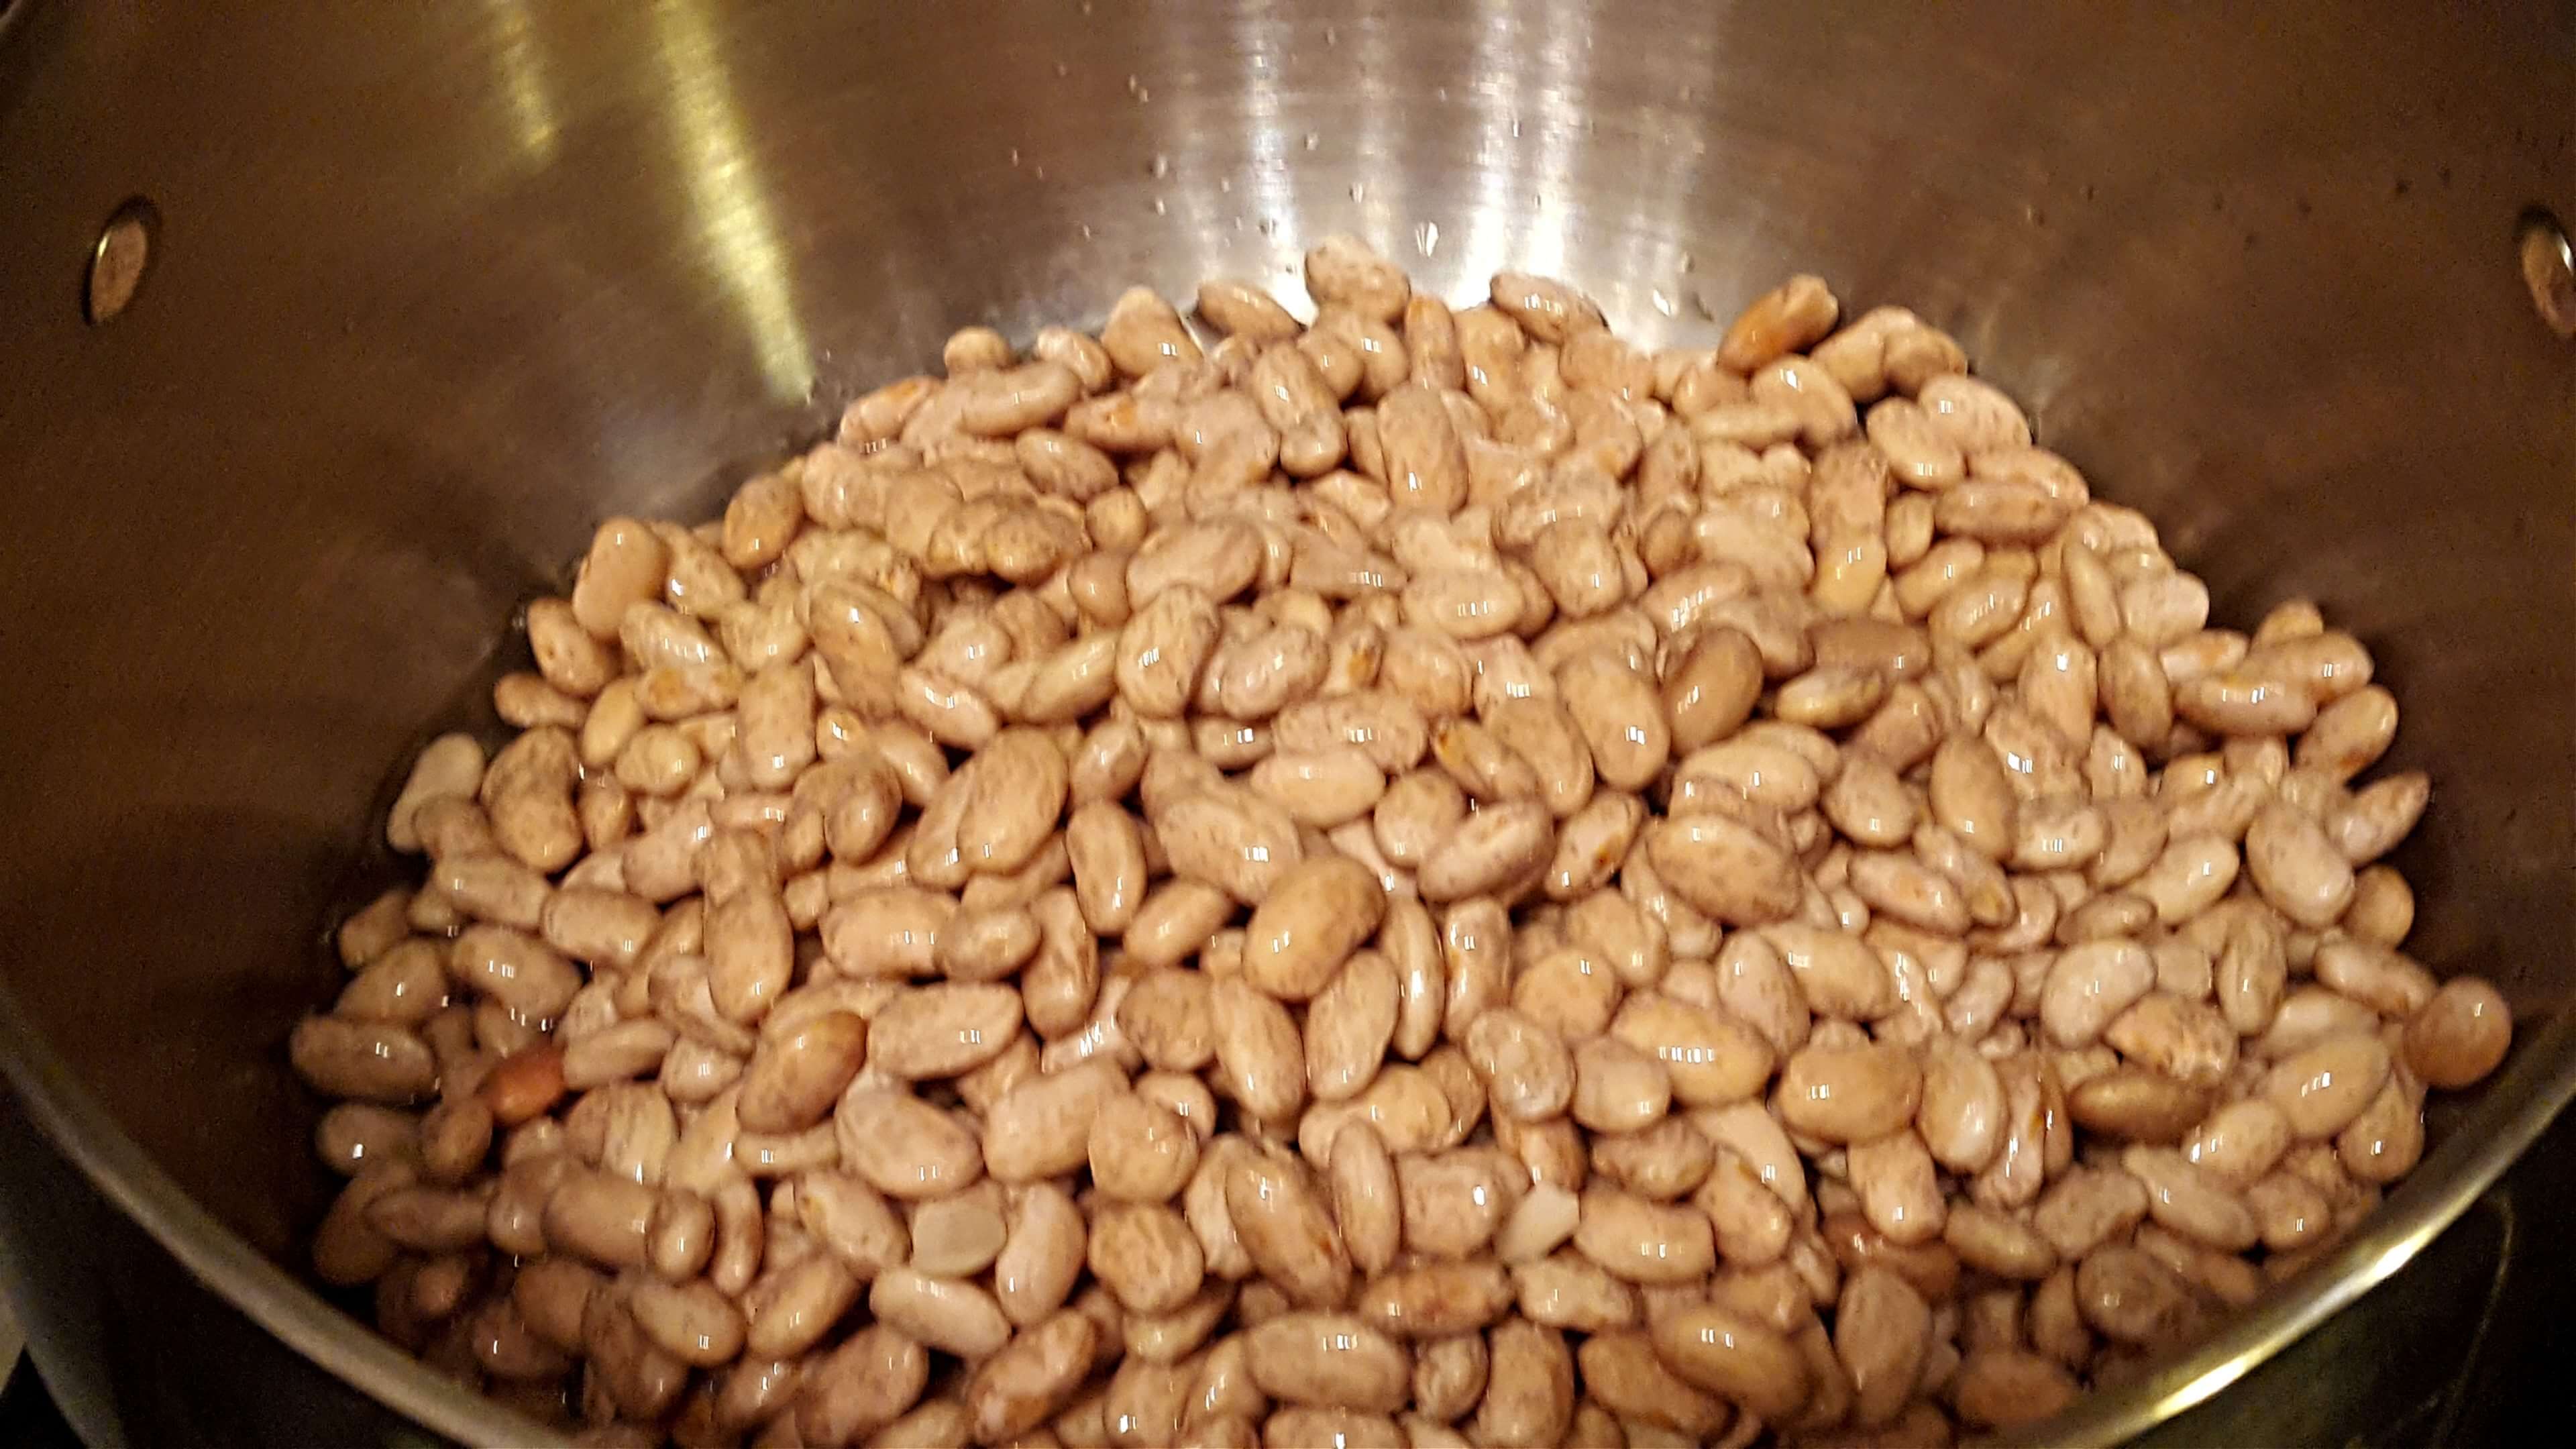 Pinto beans ready to be cooked